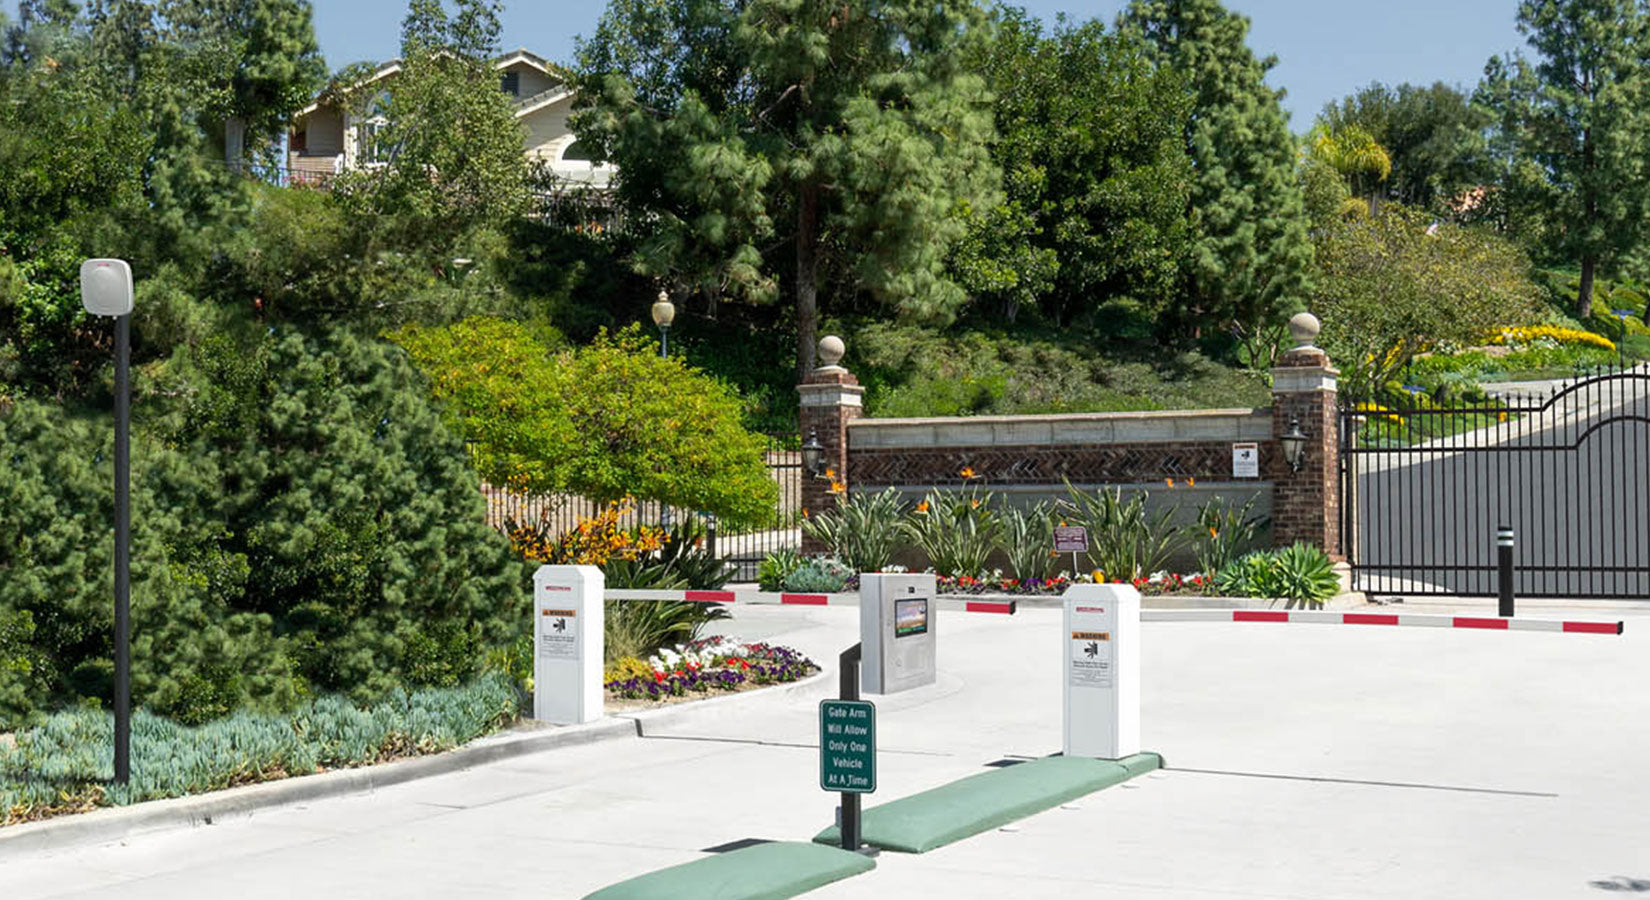 Residential Gate Access Control Systems: Ideal For Gated Communities | All Security Equipment